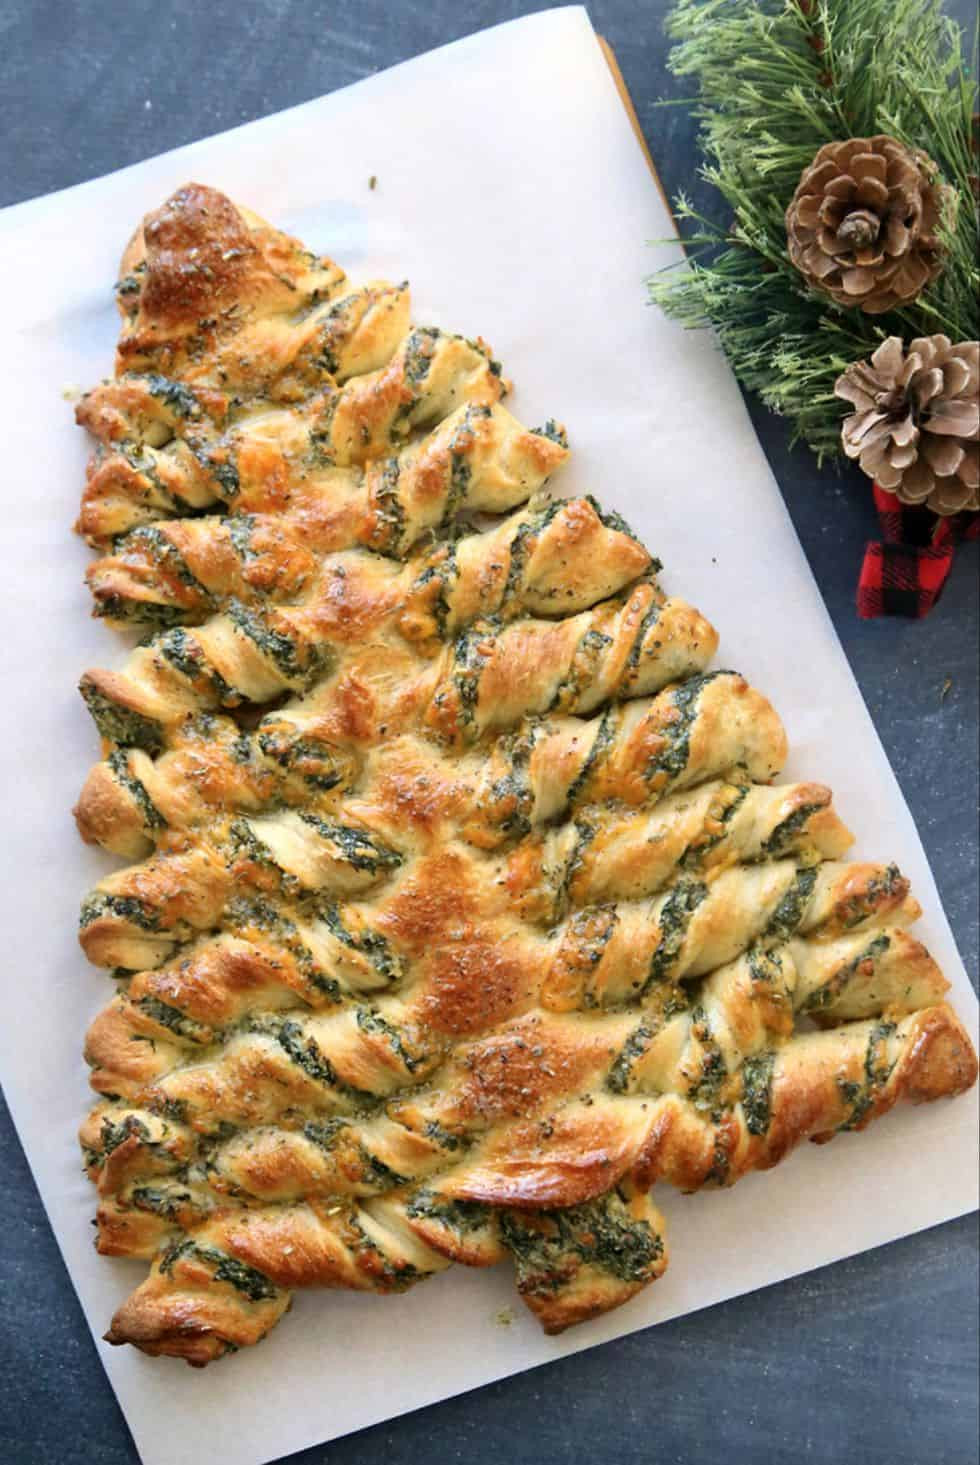 Holiday Party Recipe Ideas
 15 Christmas Party Food Ideas That Will Top Previous Years